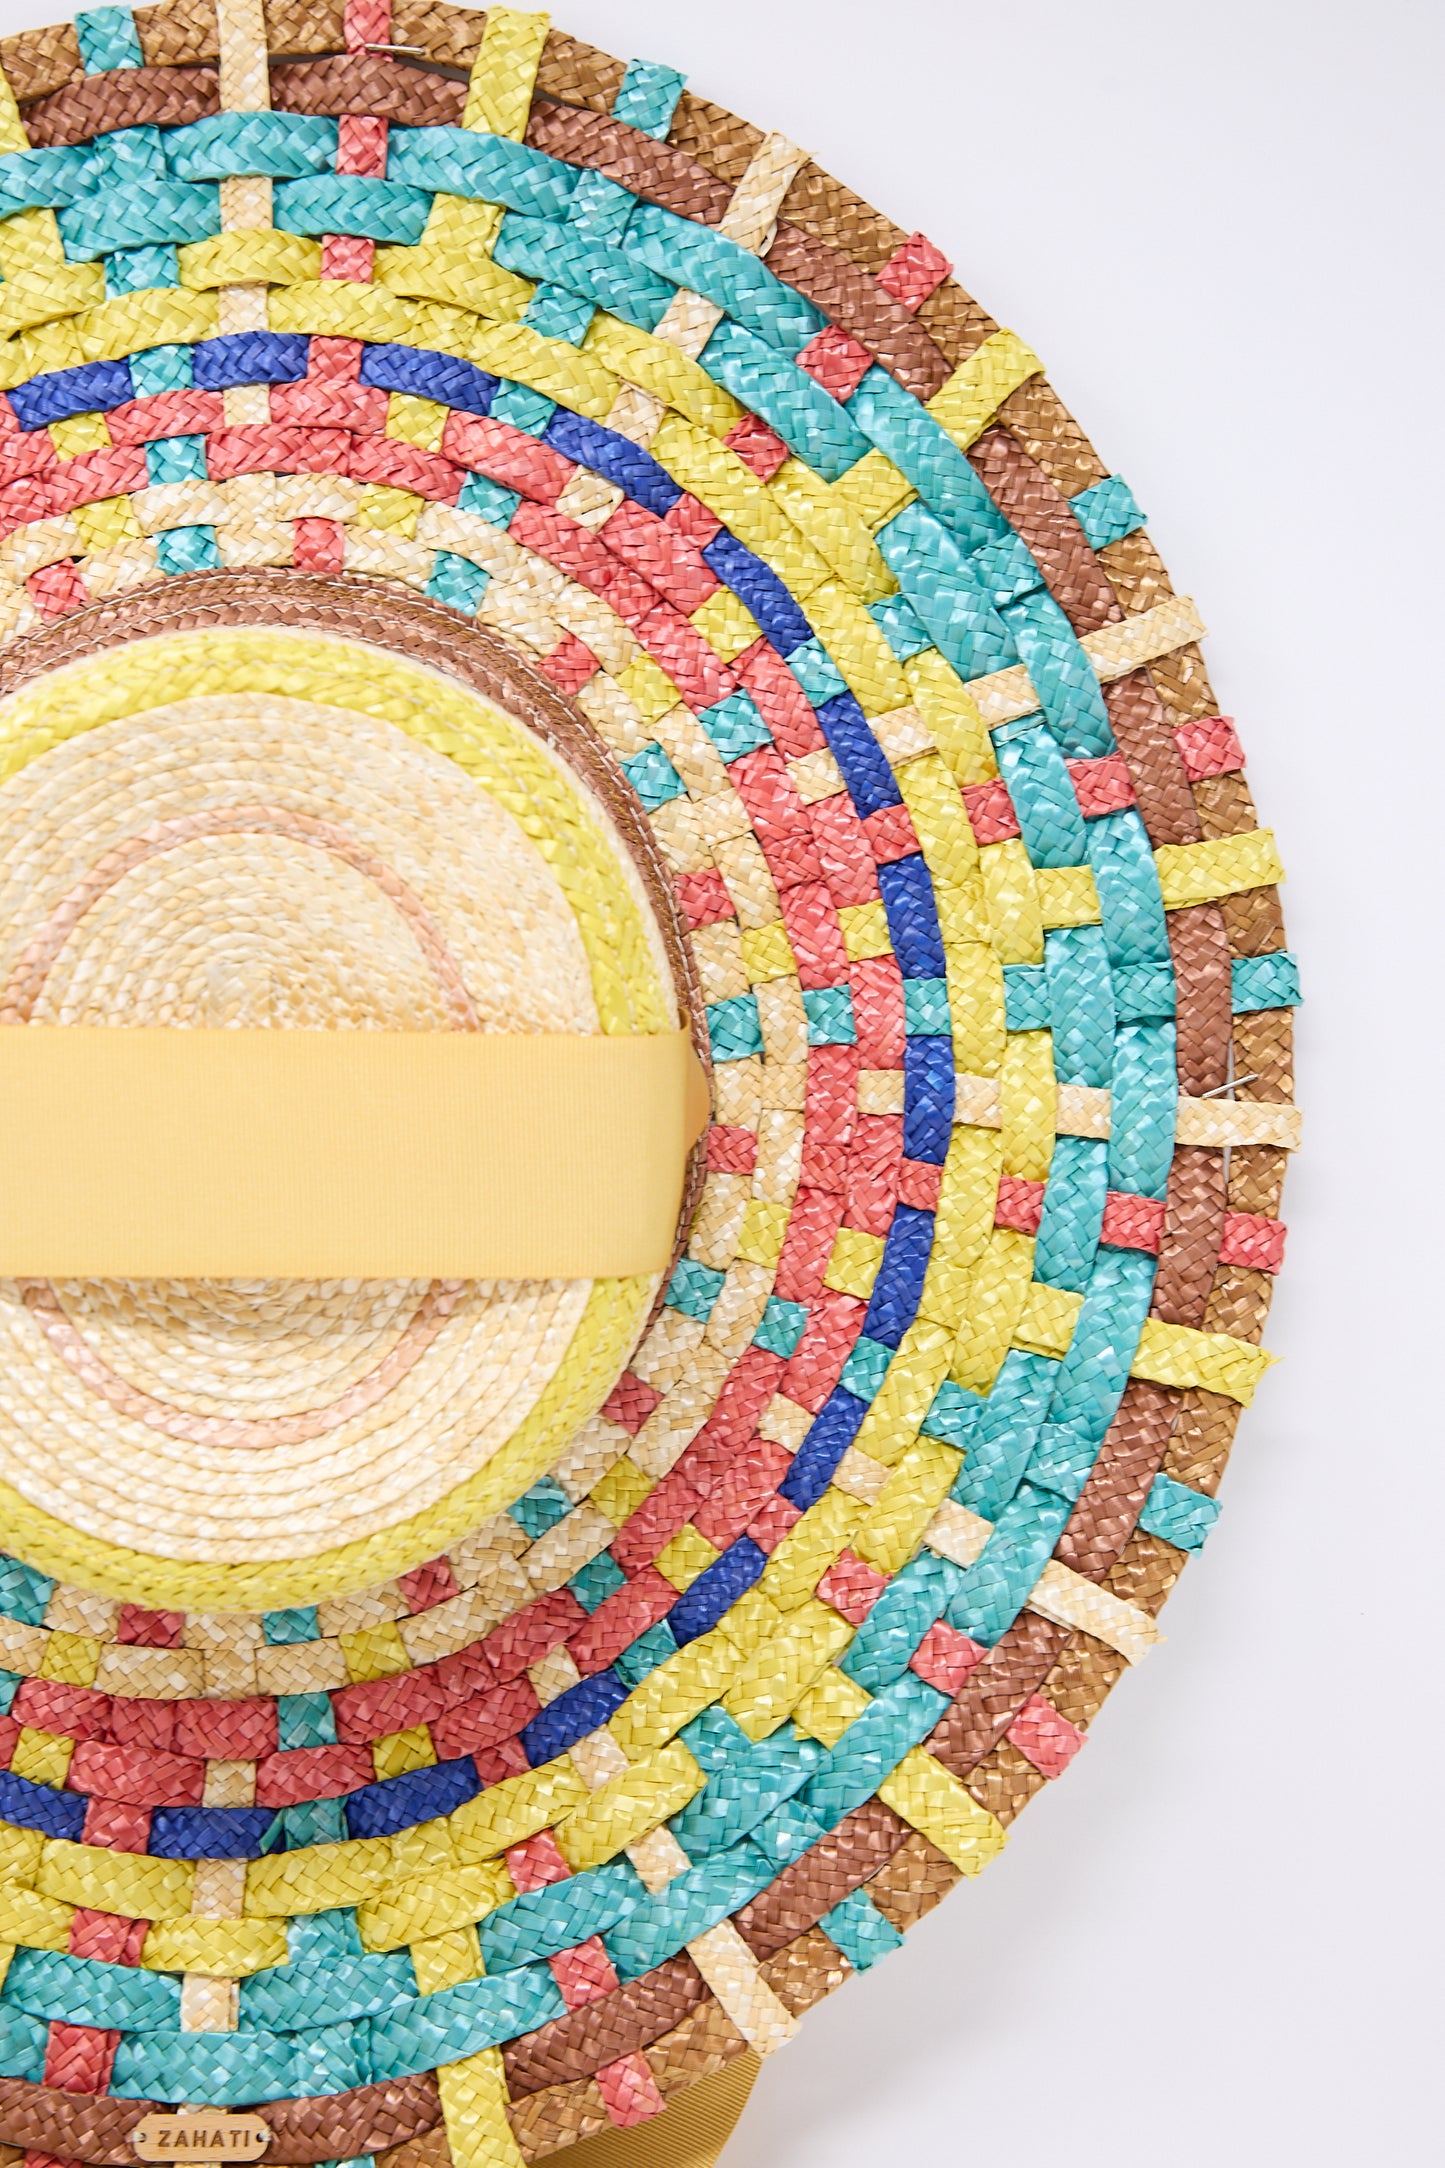 Close-up of a colorful handmade Straw Cuchi Tris-Tras No. 94 Hat with Laces with concentric patterns in yellow, blue, red, and green, featuring a yellow headband. The wide brim is crafted from braided straw. The brand name "Zahati" is visible on the bottom edge of the hat.